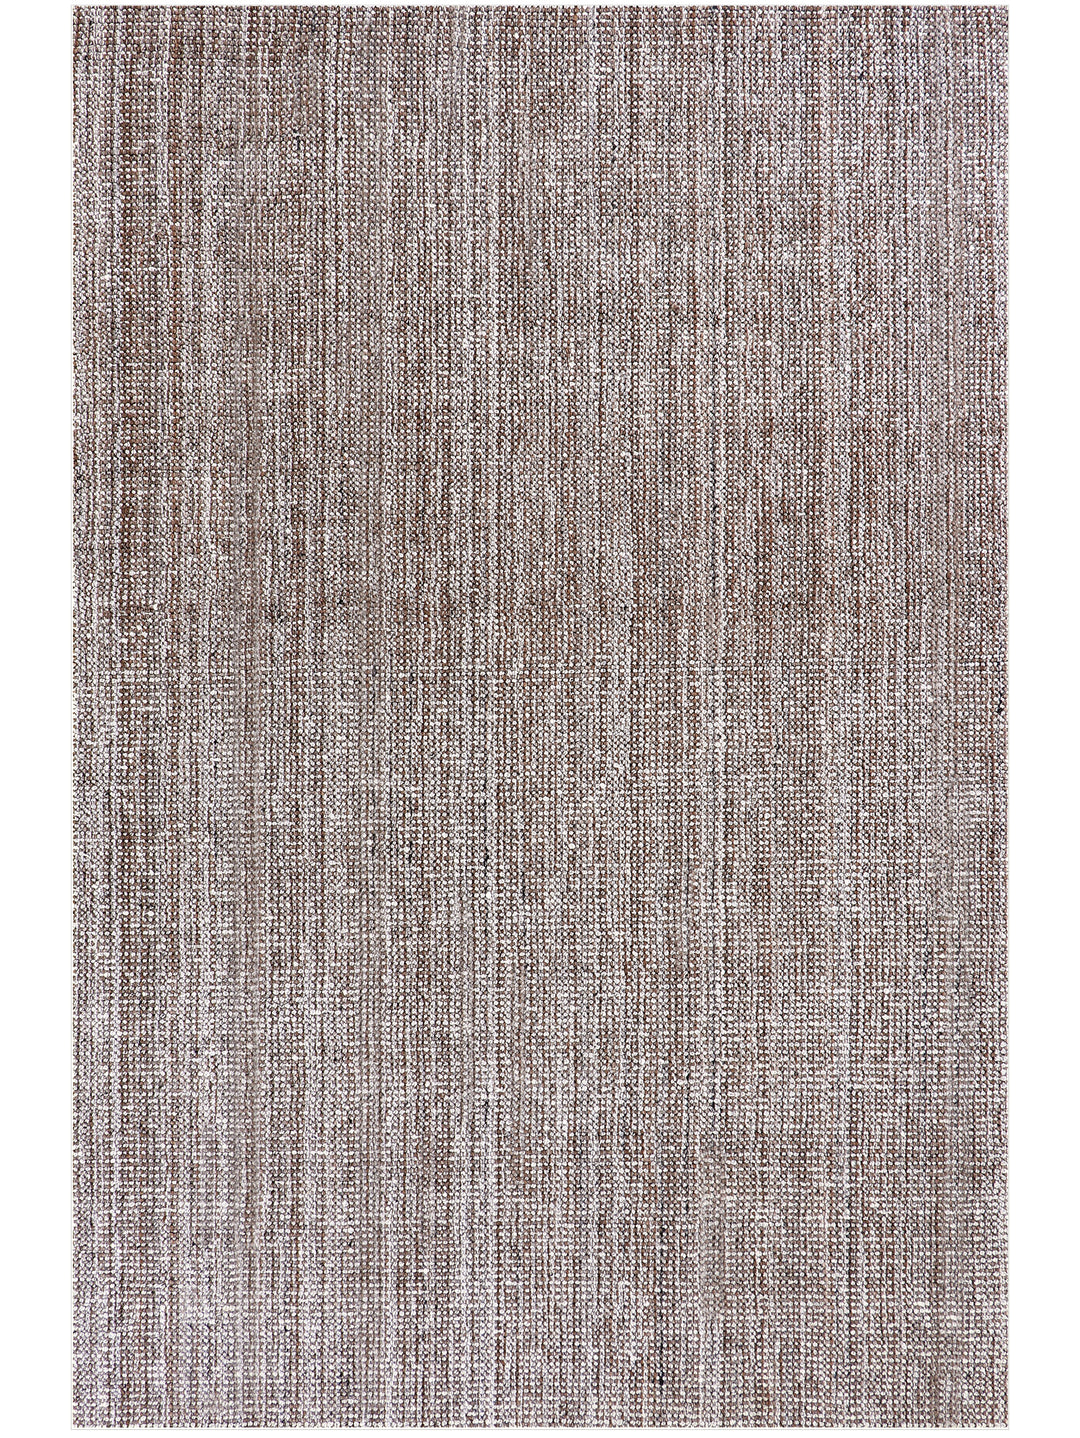 Perla Rug in French Toast